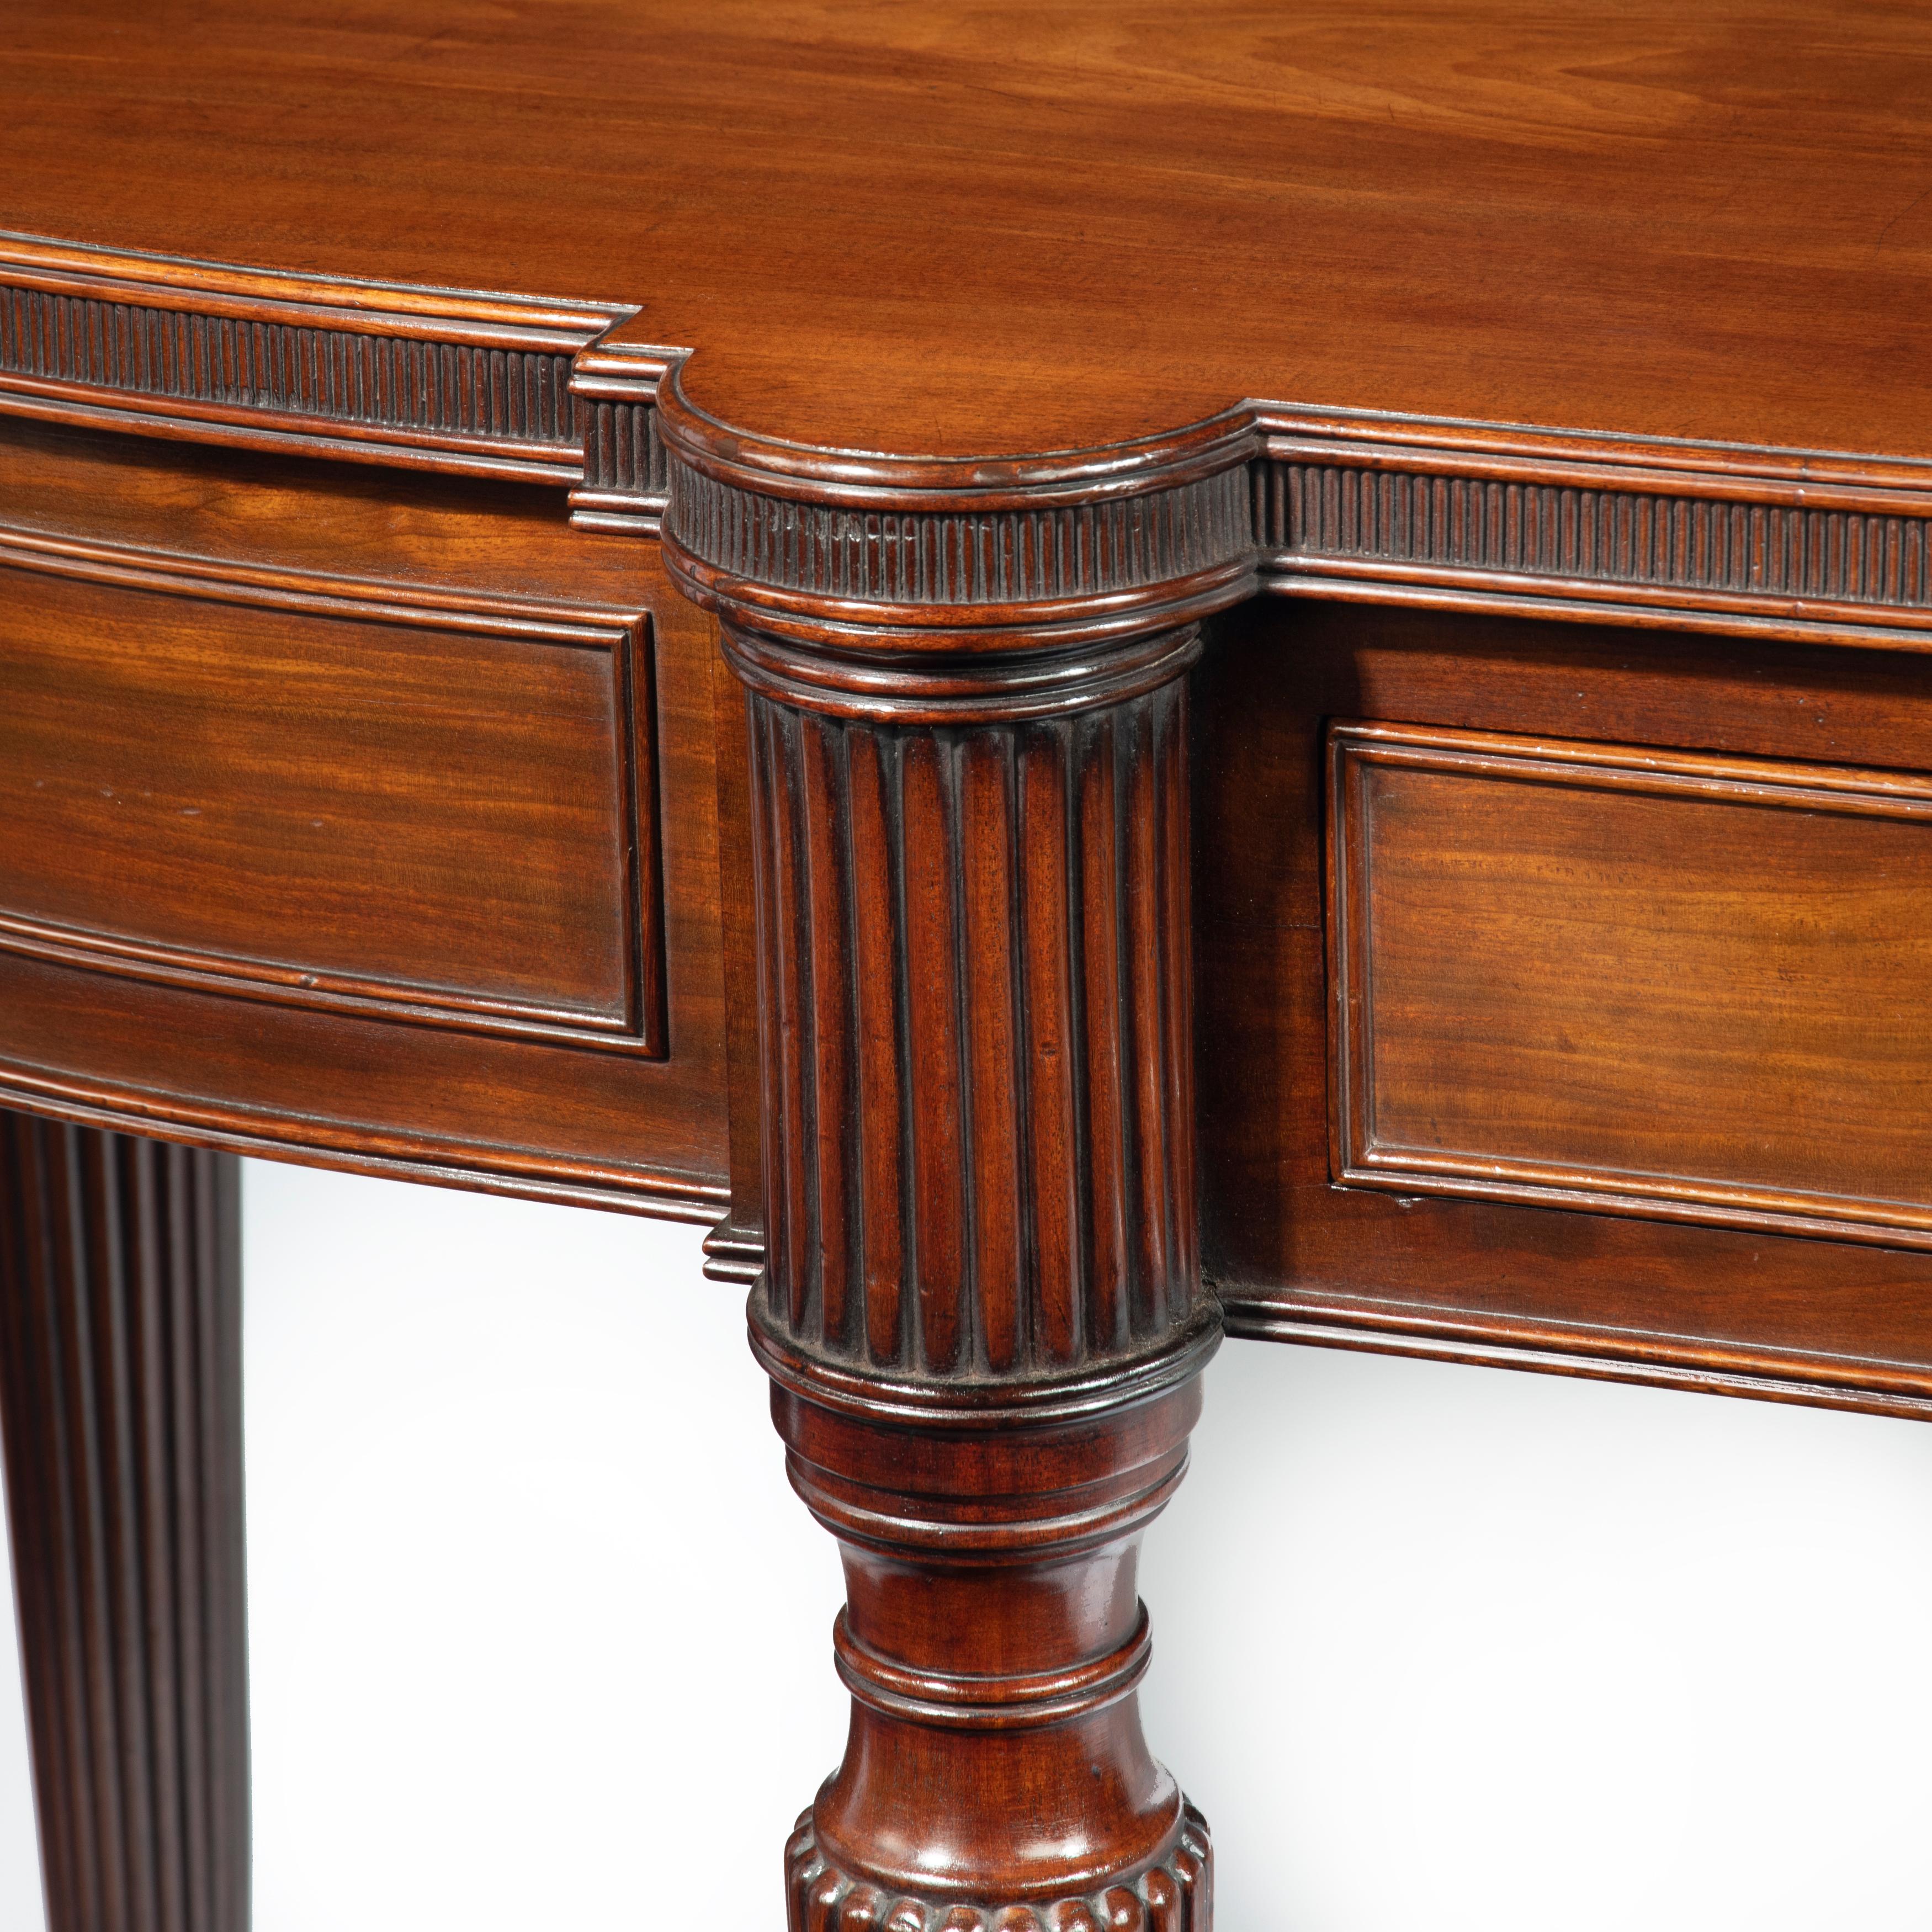 Early 19th Century Regency Mahogany Serving Table Attributed to Gillows